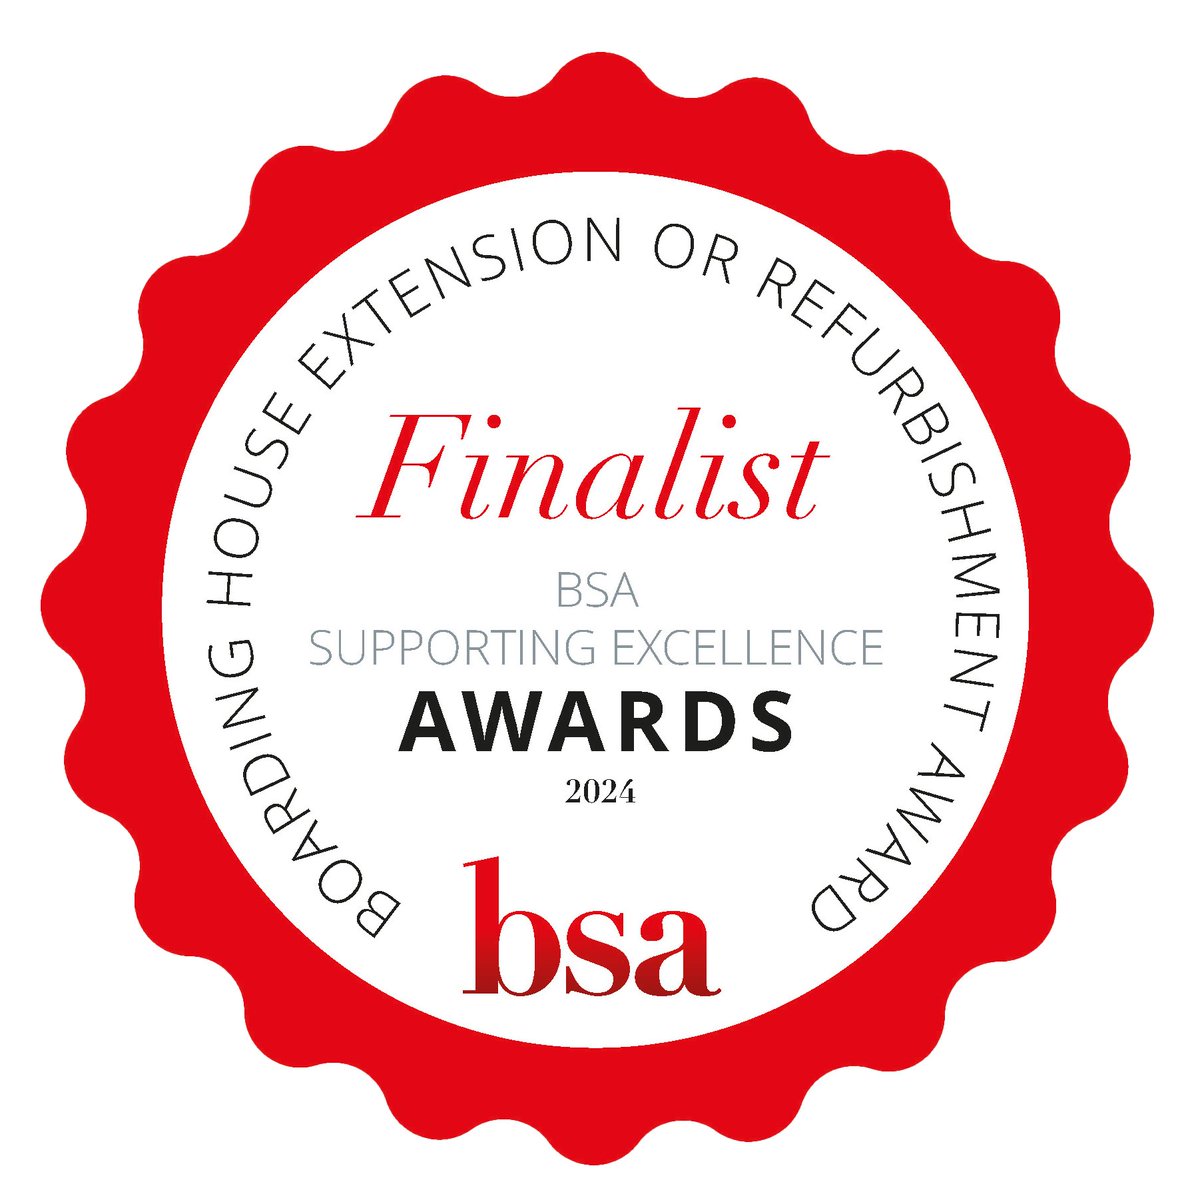 Hard work pays off. The extensive refurbishment of our Victorian boarding house, Courtenay, has been shortlisted as a finalist in the Boarding House Extension or Refurbishment Award category of the BSA Boarding Excellence Award 2024 Read more: mountkelly.com/2024/04/18/a-v…